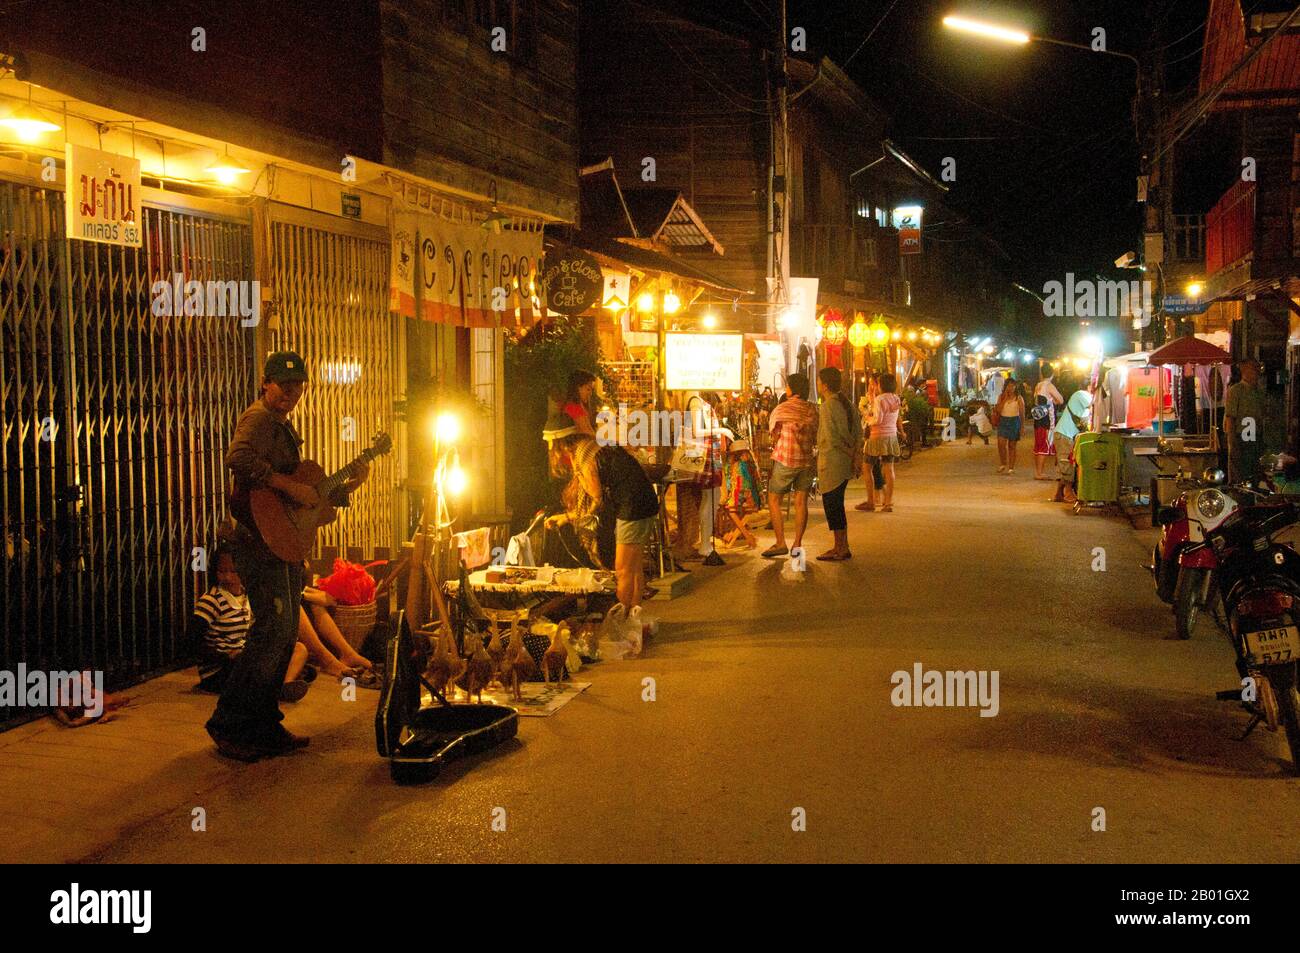 Thailand: Street musician entertaining late evening shoppers on Chai Kong Road, Chiang Khan, Loei Province.  Loei (Thai: เลย) Province is located in Thailand's upper North-East. Neighboring provinces are (from east clockwise) Nong Khai, Udon Thani, Nongbua Lamphu, Khon Kaen, Phetchabun, Phitsanulok. In the north it borders Xaignabouli and Vientiane Provinces of Laos.  The province is covered with low mountains, while the capital Loei is located in a fertile basin. The Loei River, which flows through the province, is a tributary of the Mekong. Stock Photo